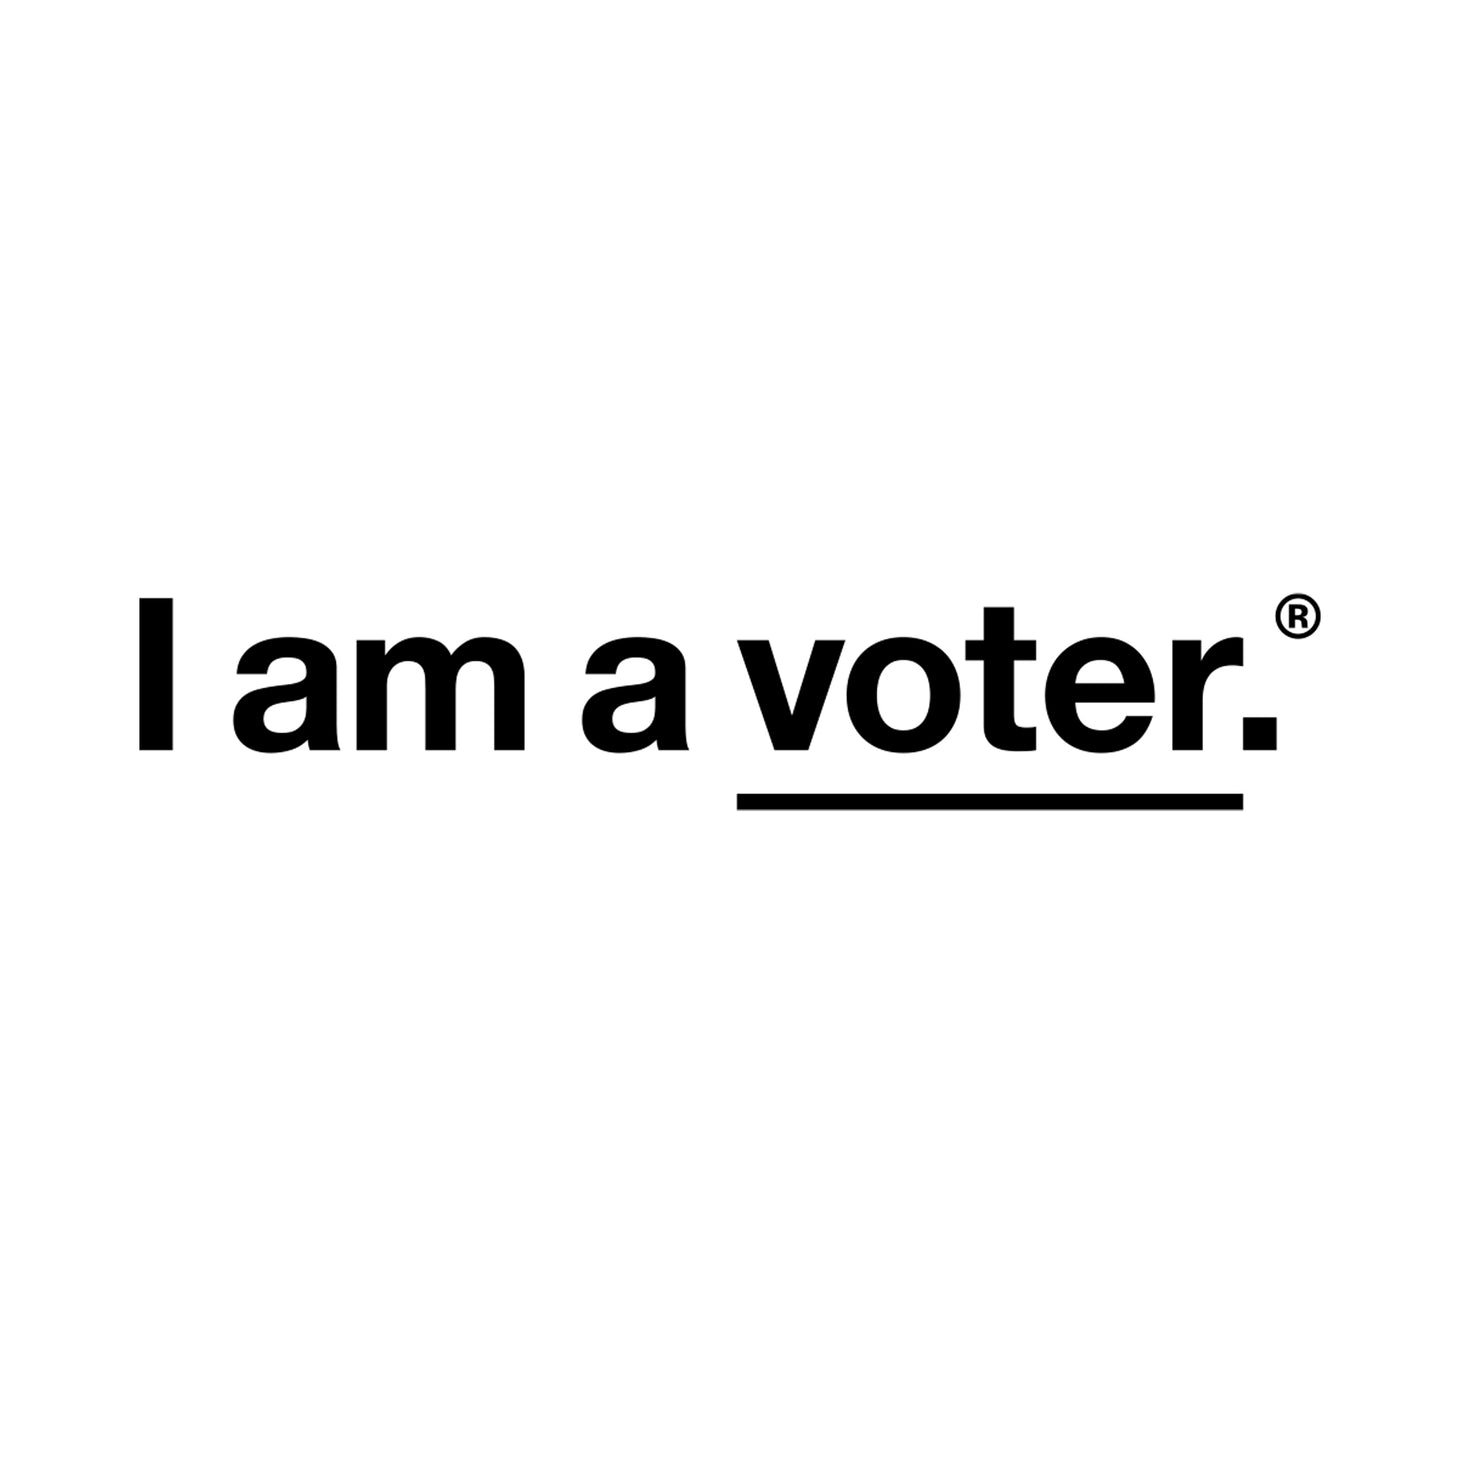 I am a voter.®